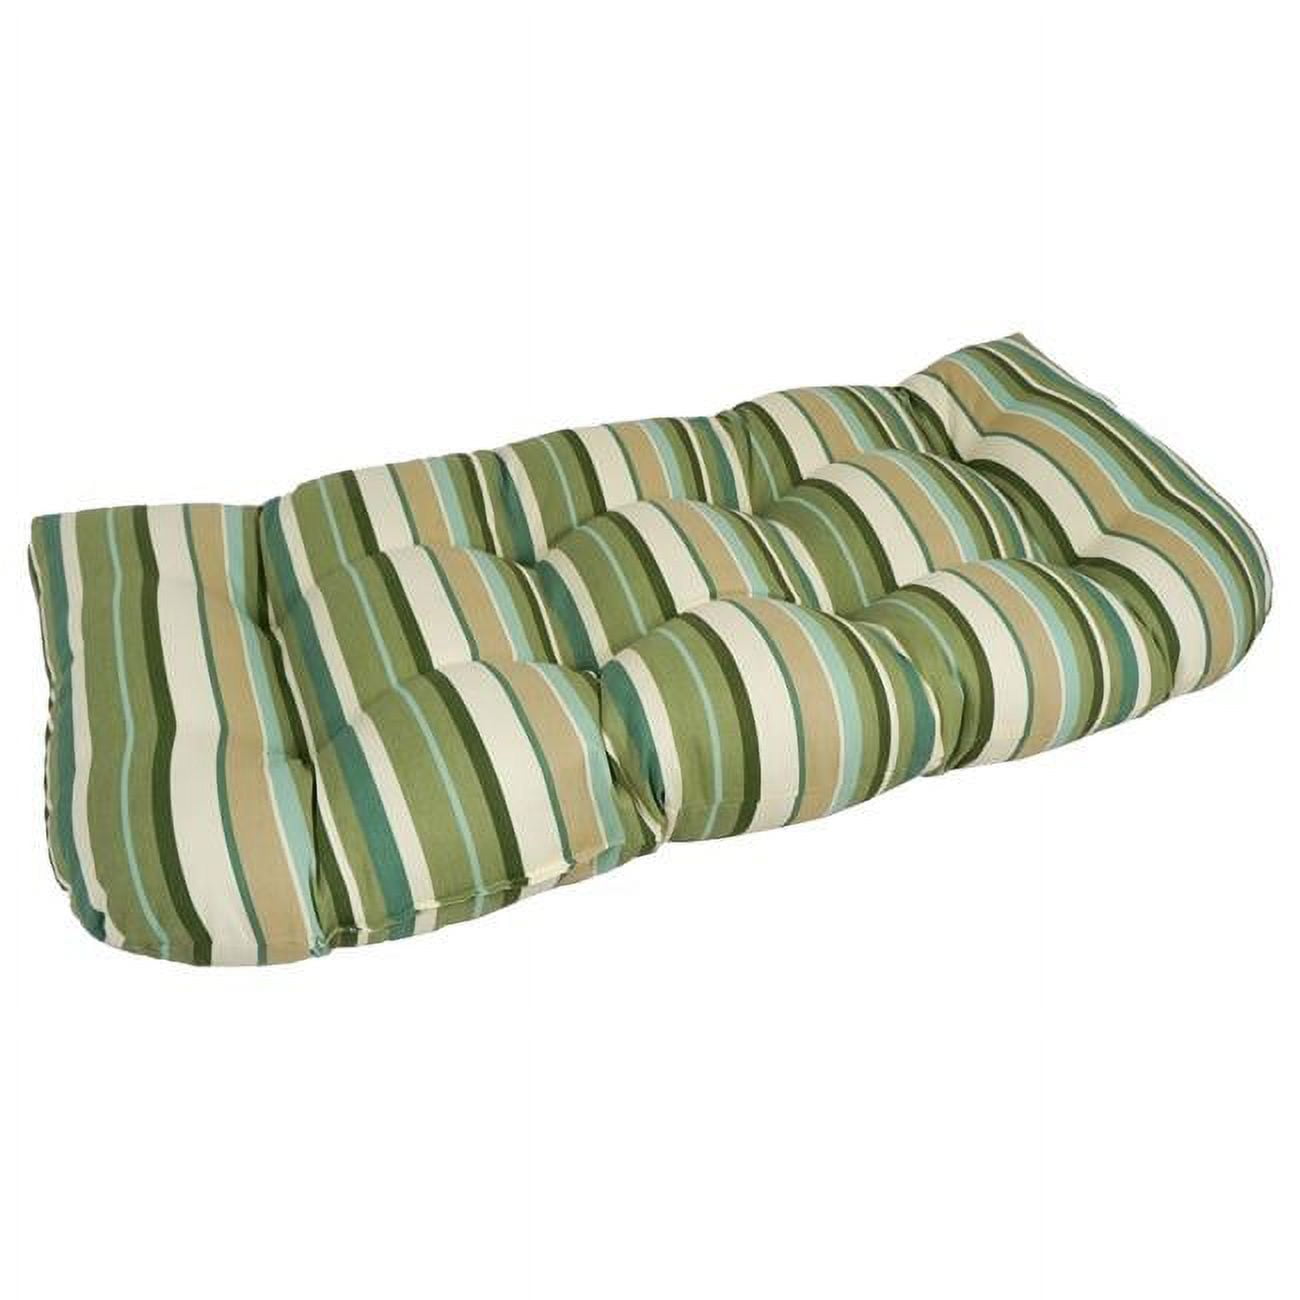 Picture of Blazing Needles 93180-LS-OD-058 42 x 19 in. U-Shaped Patterned Spun Polyester Tufted Settee & Bench Cushion&#44; Multi Green Stripe